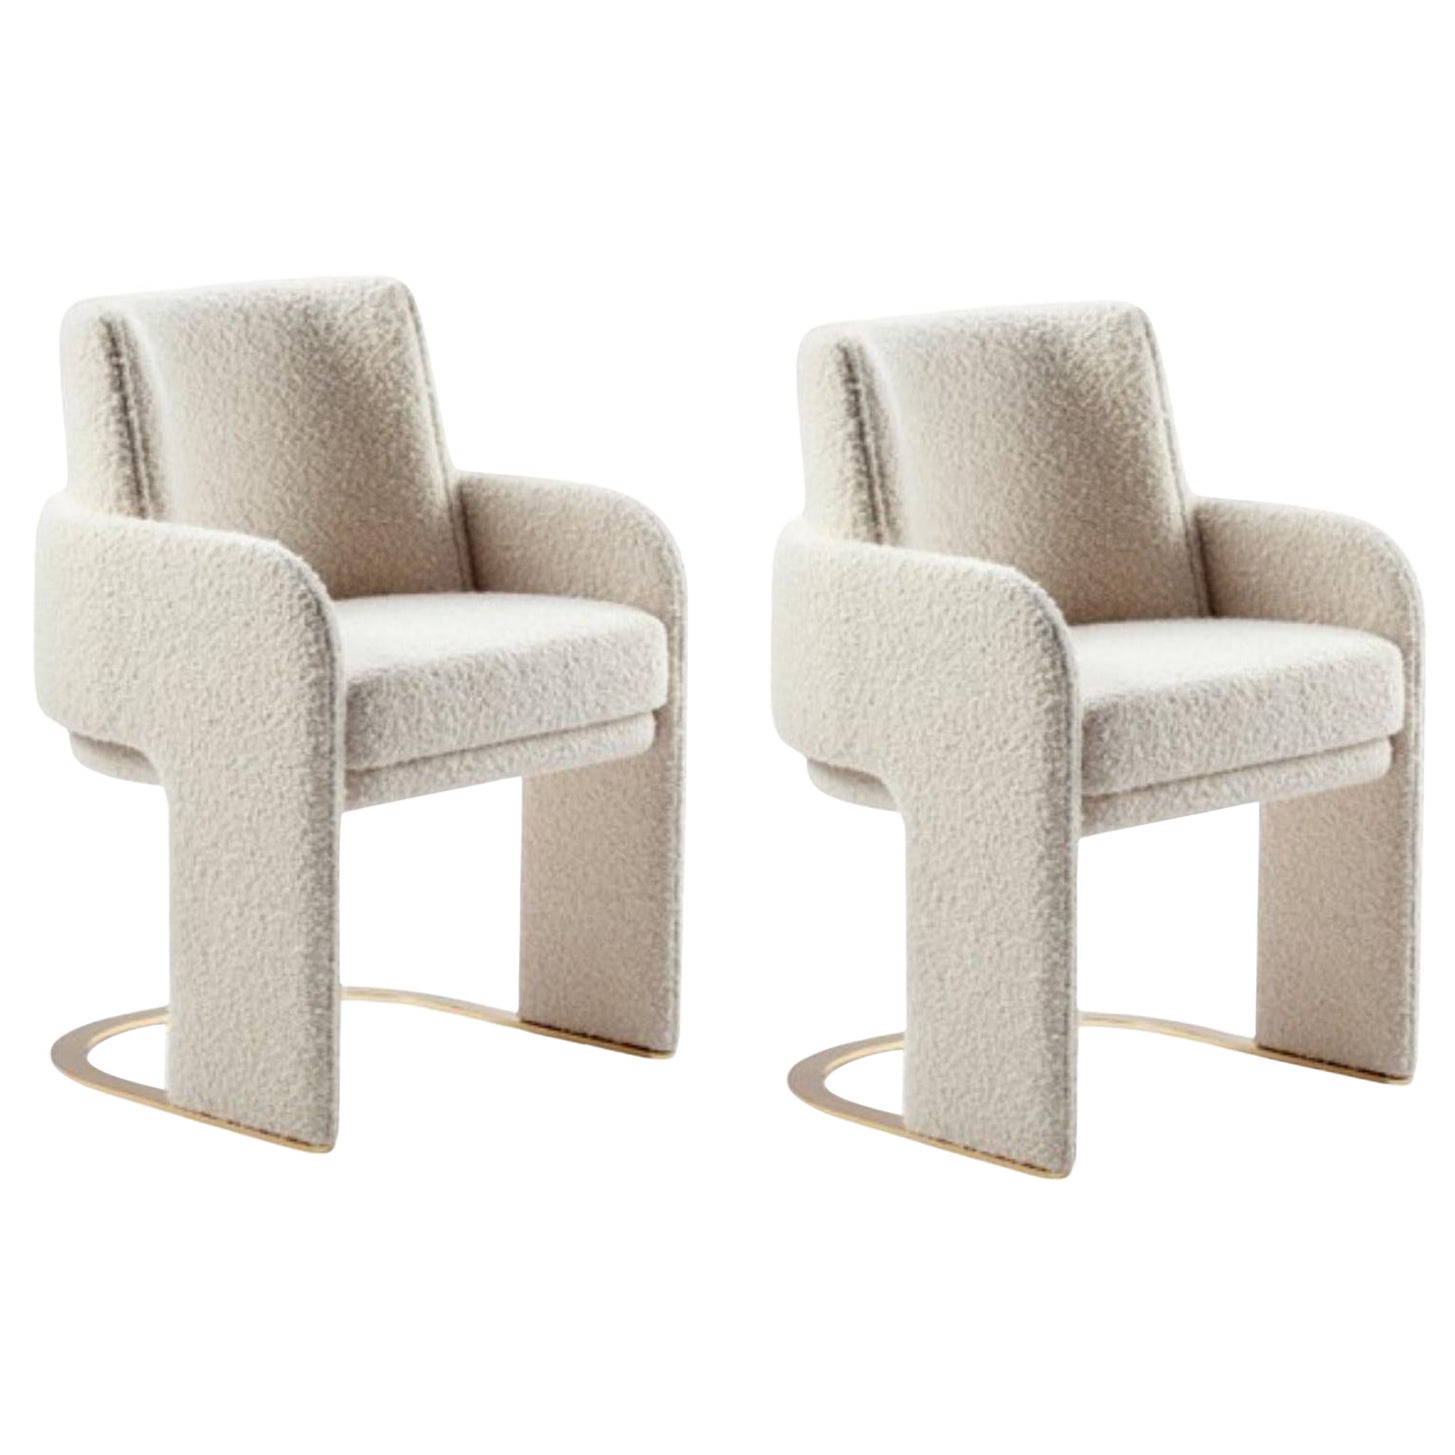 Set of 2 Bouclé Odisseia Chairs by Dooq